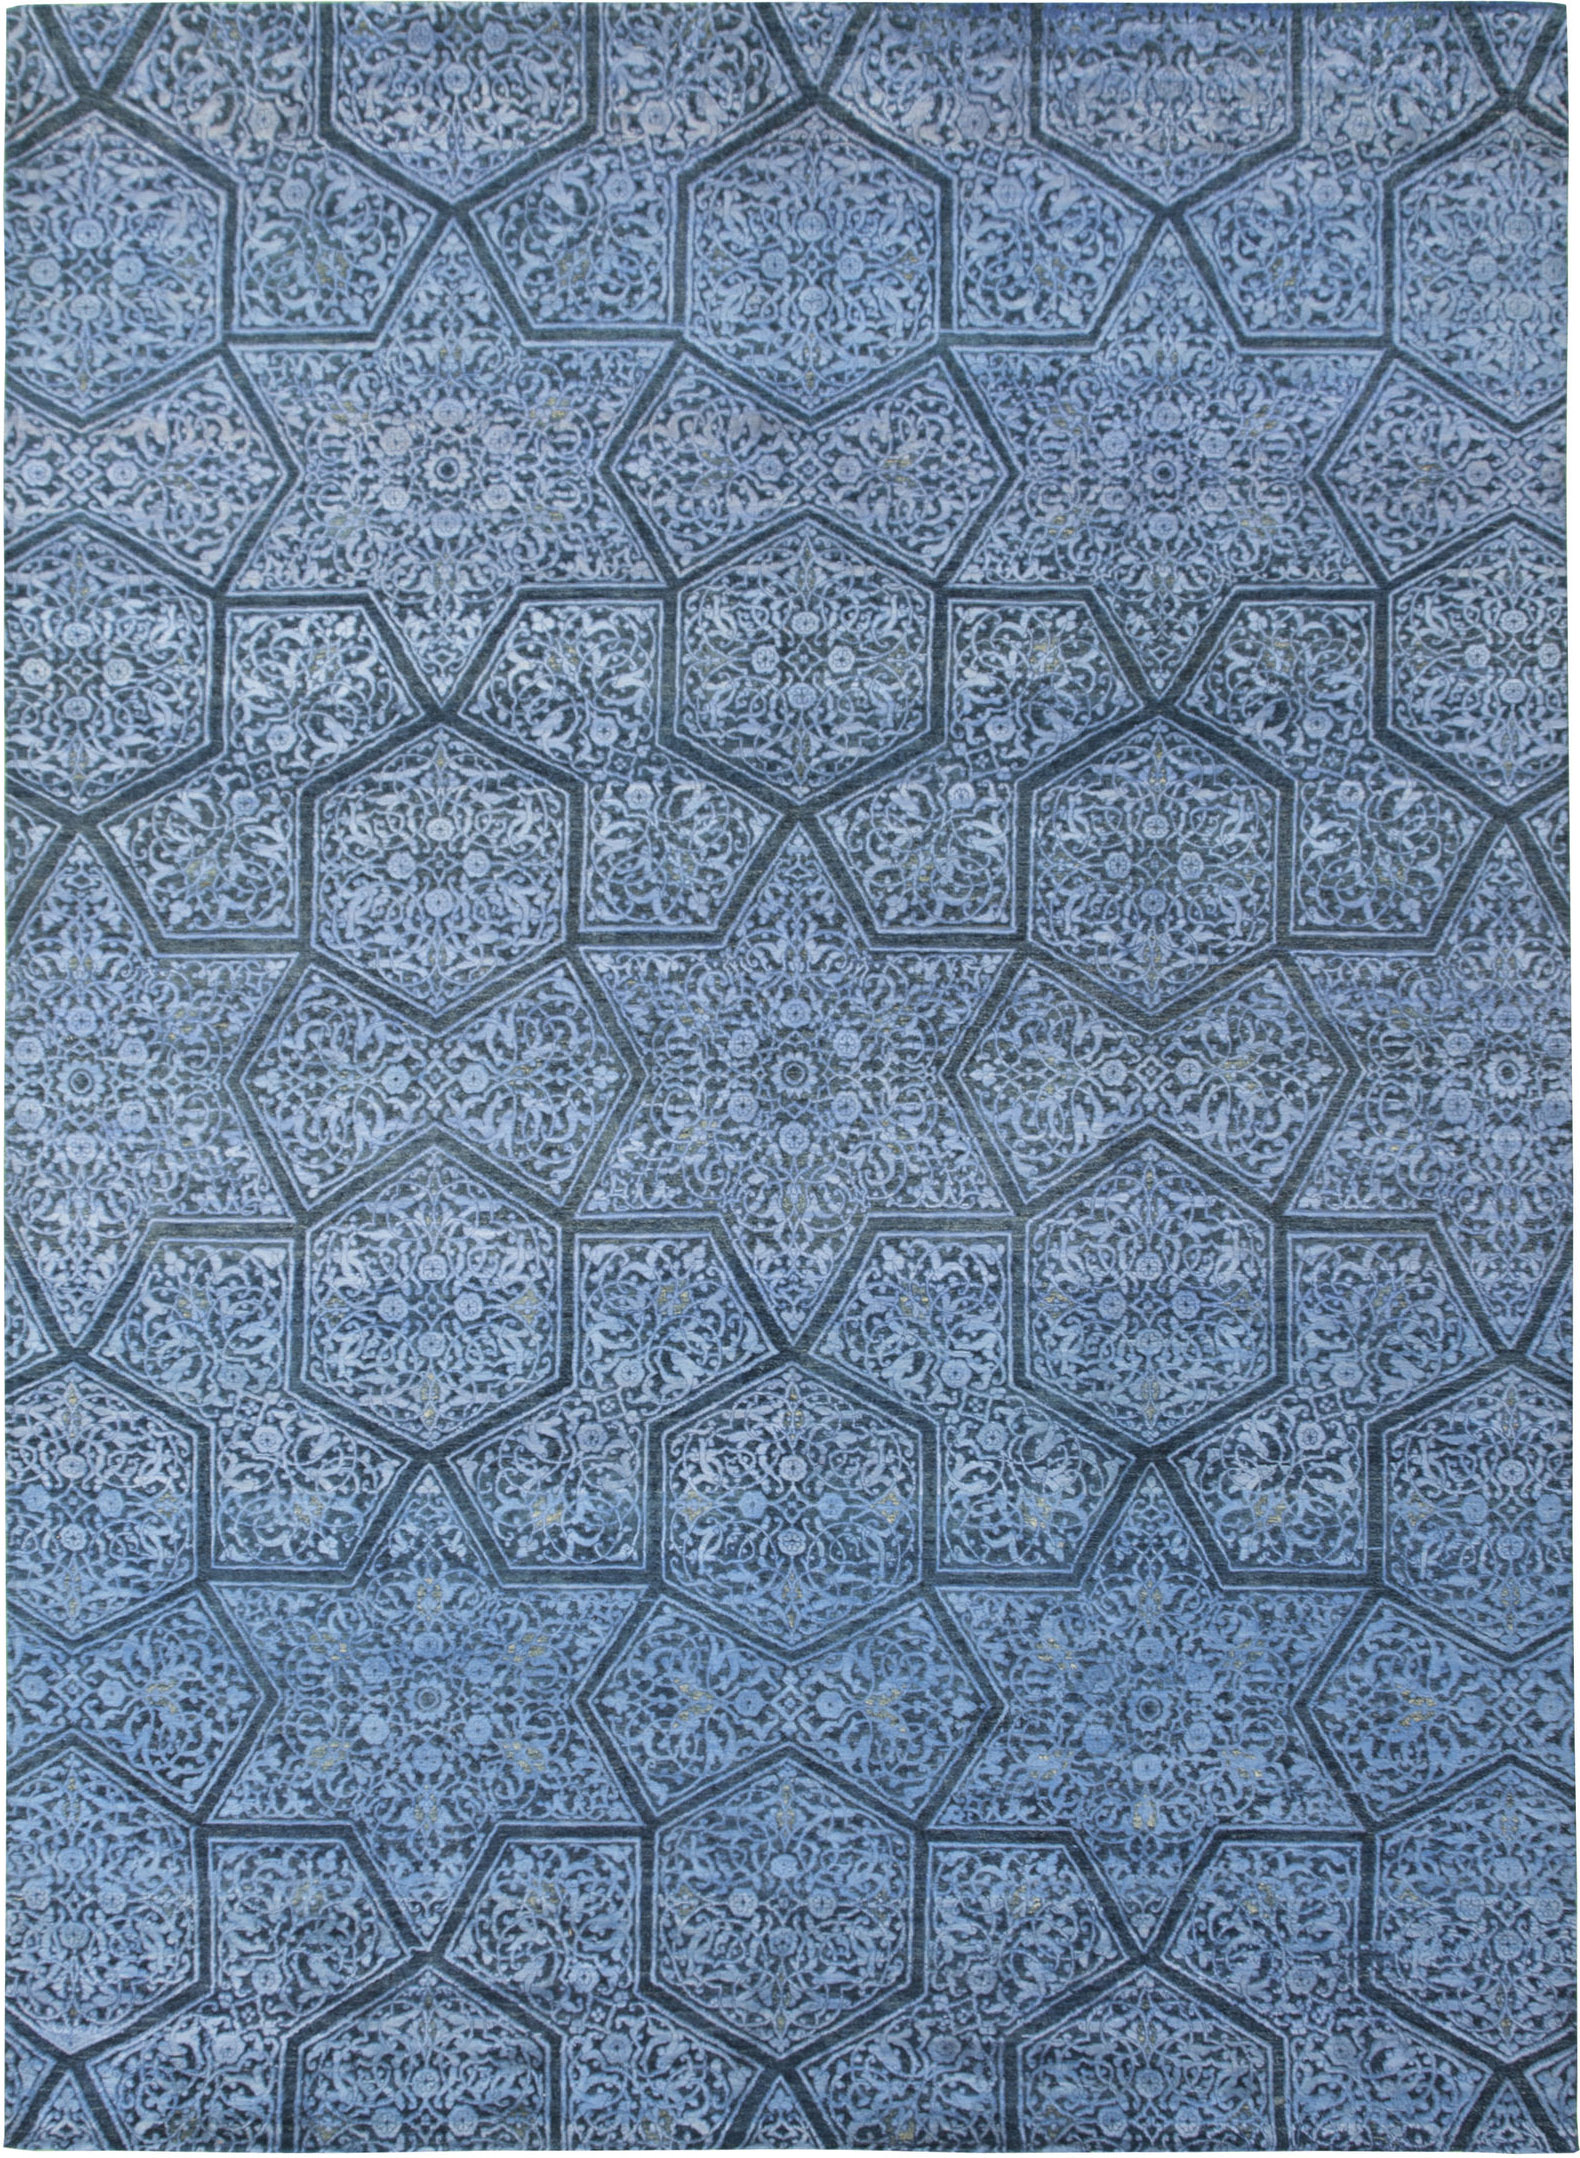 Un-Official Selection, Best Transitional Design: 'Ottoman Collection' by Art Resources - artresources.us | Image courtesy of Art Resources via Domotex.